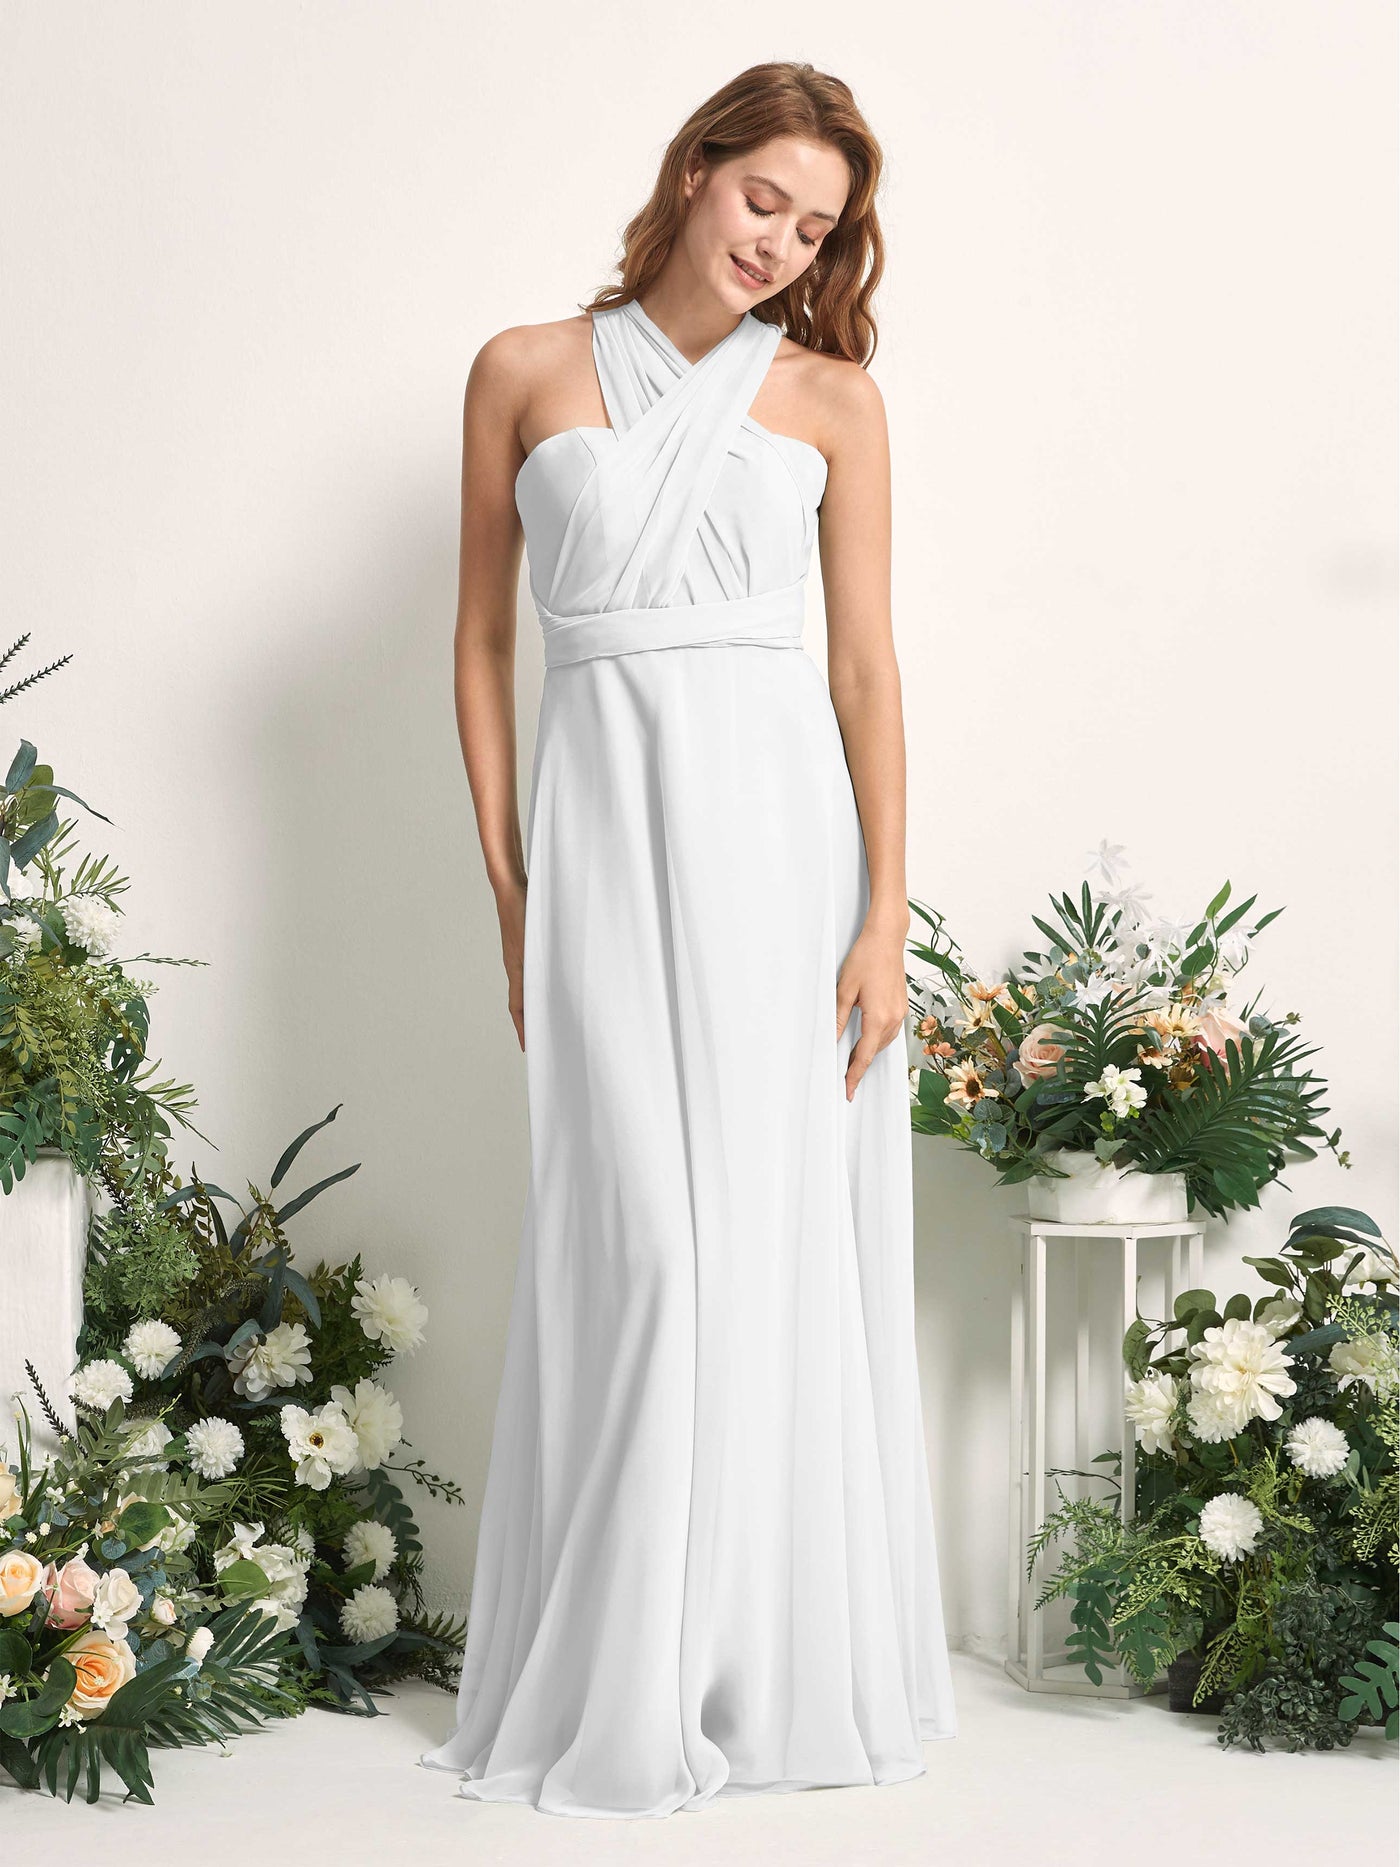 Bridesmaid Dress A-line Chiffon Halter Full Length Short Sleeves Wedding Party Dress - White (81226342)#color_white